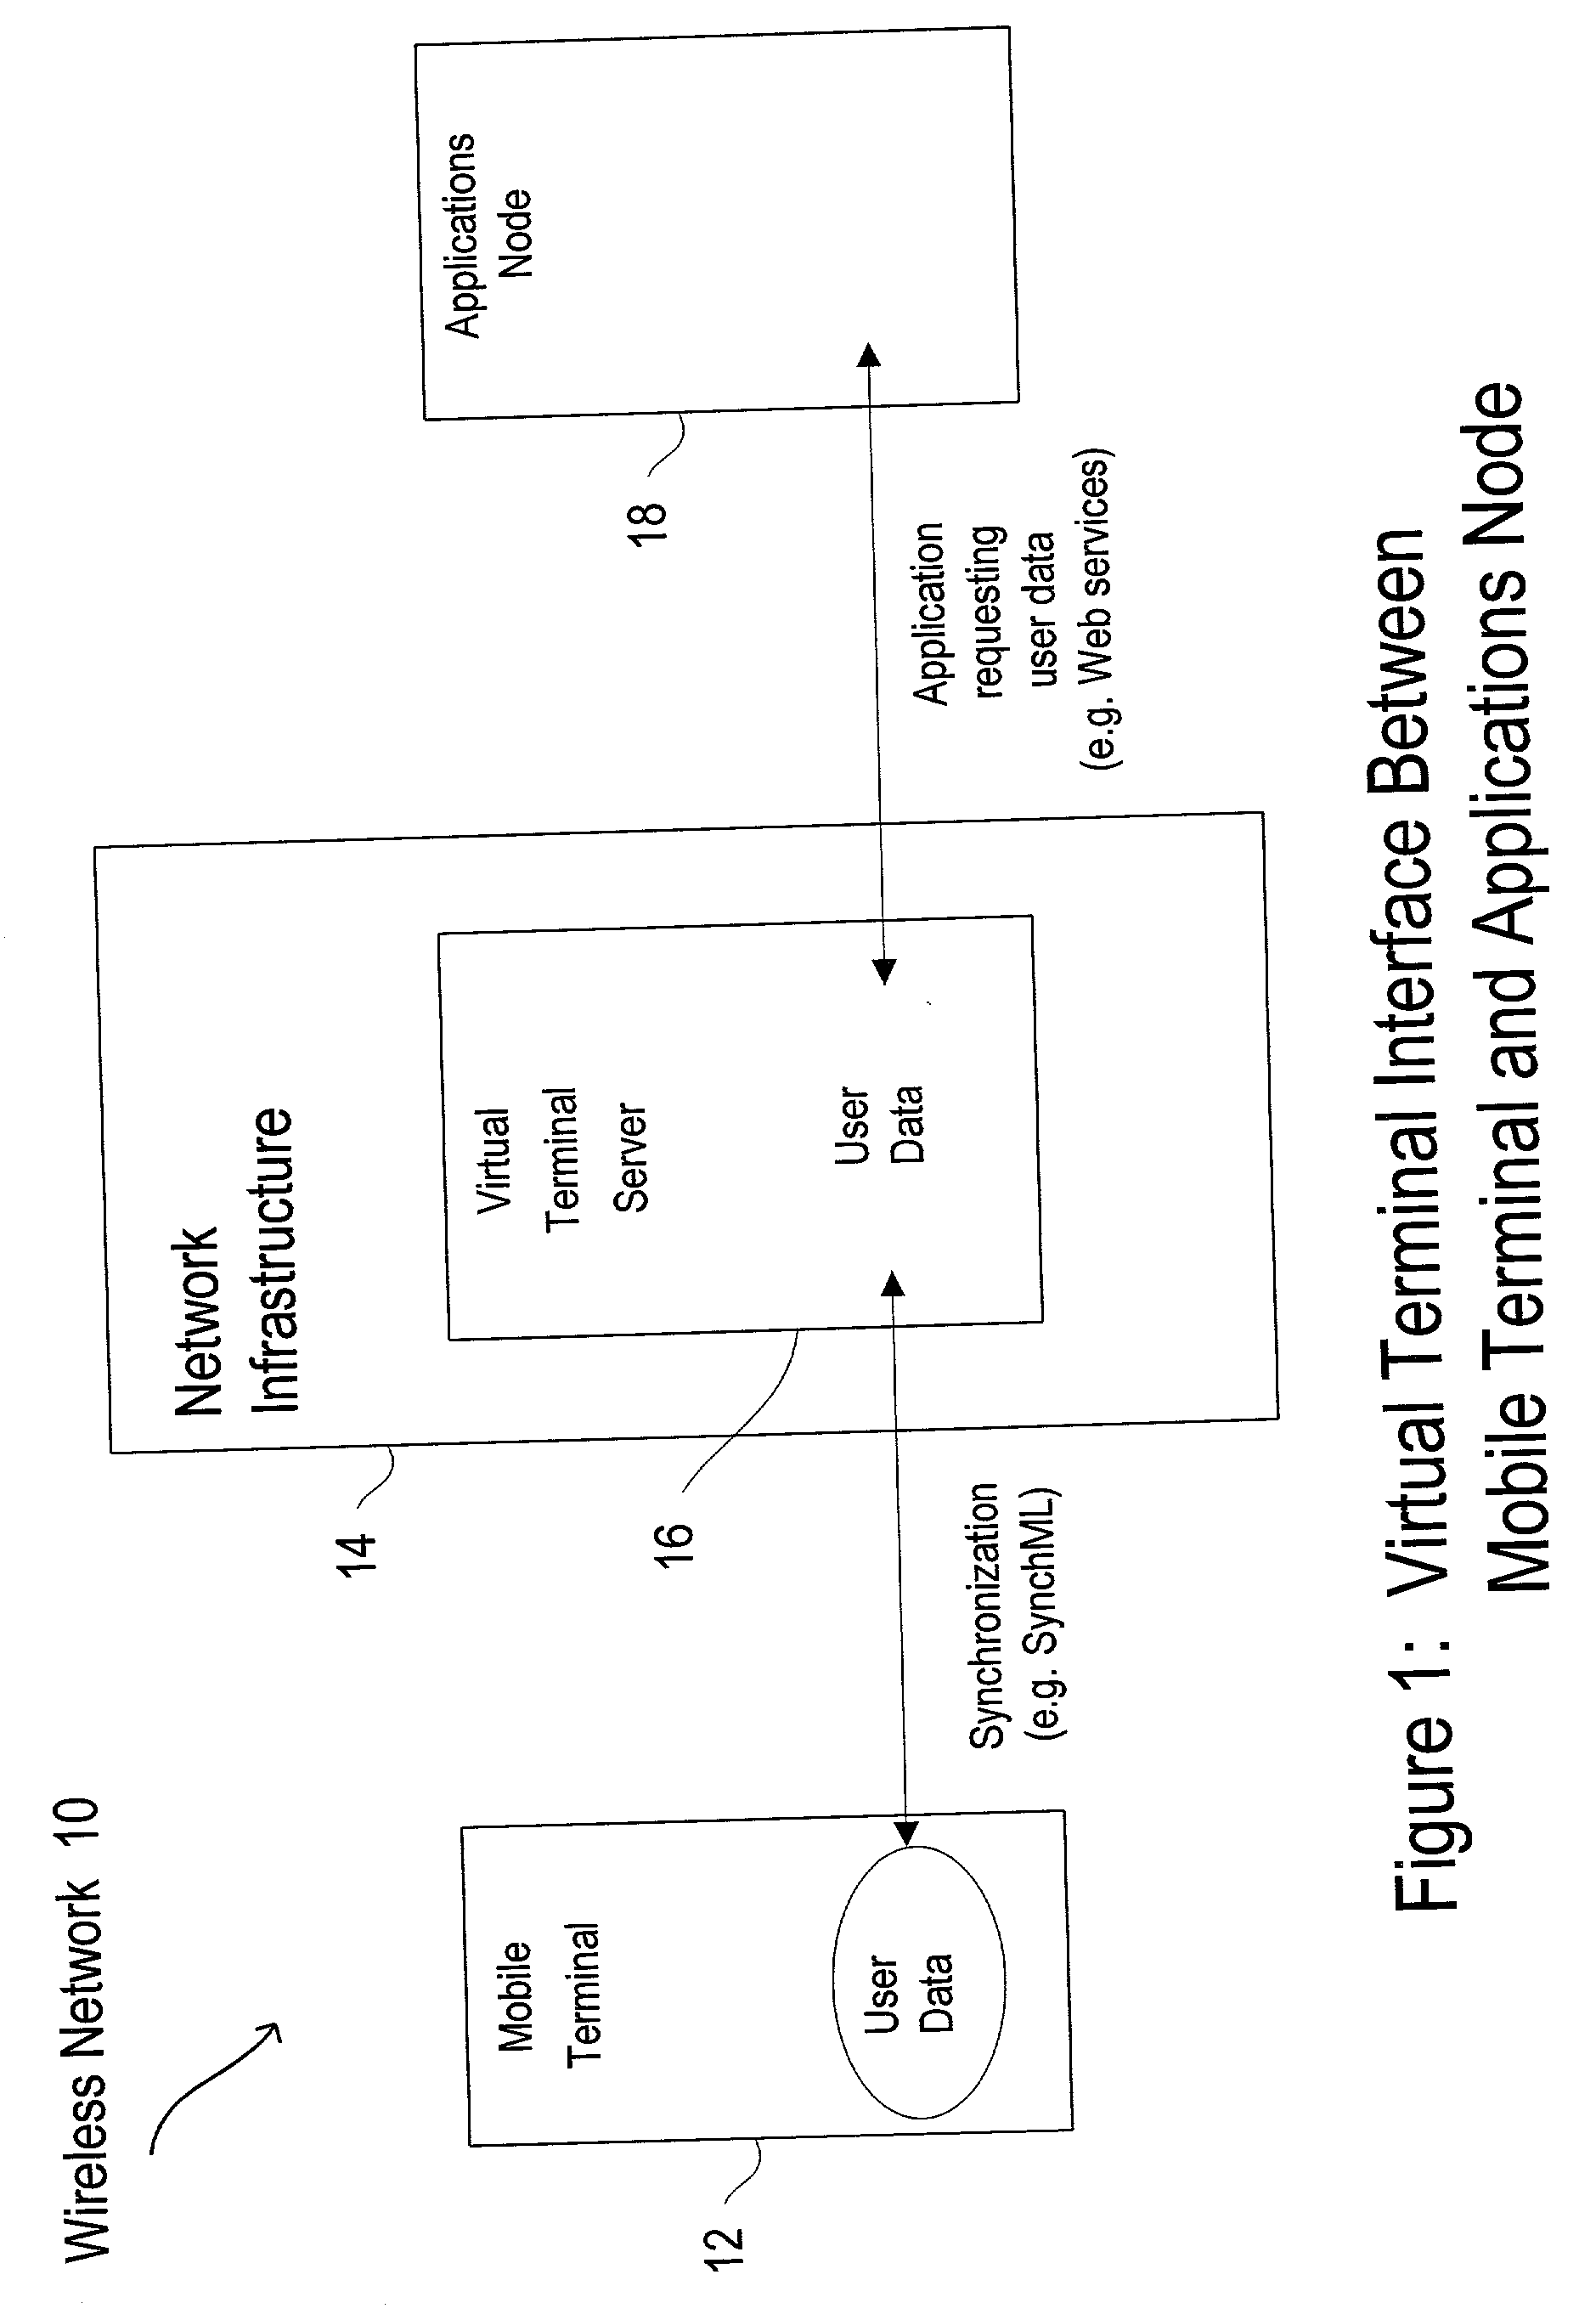 Virtual terminal for mobile network interface between mobile terminal and software applications node